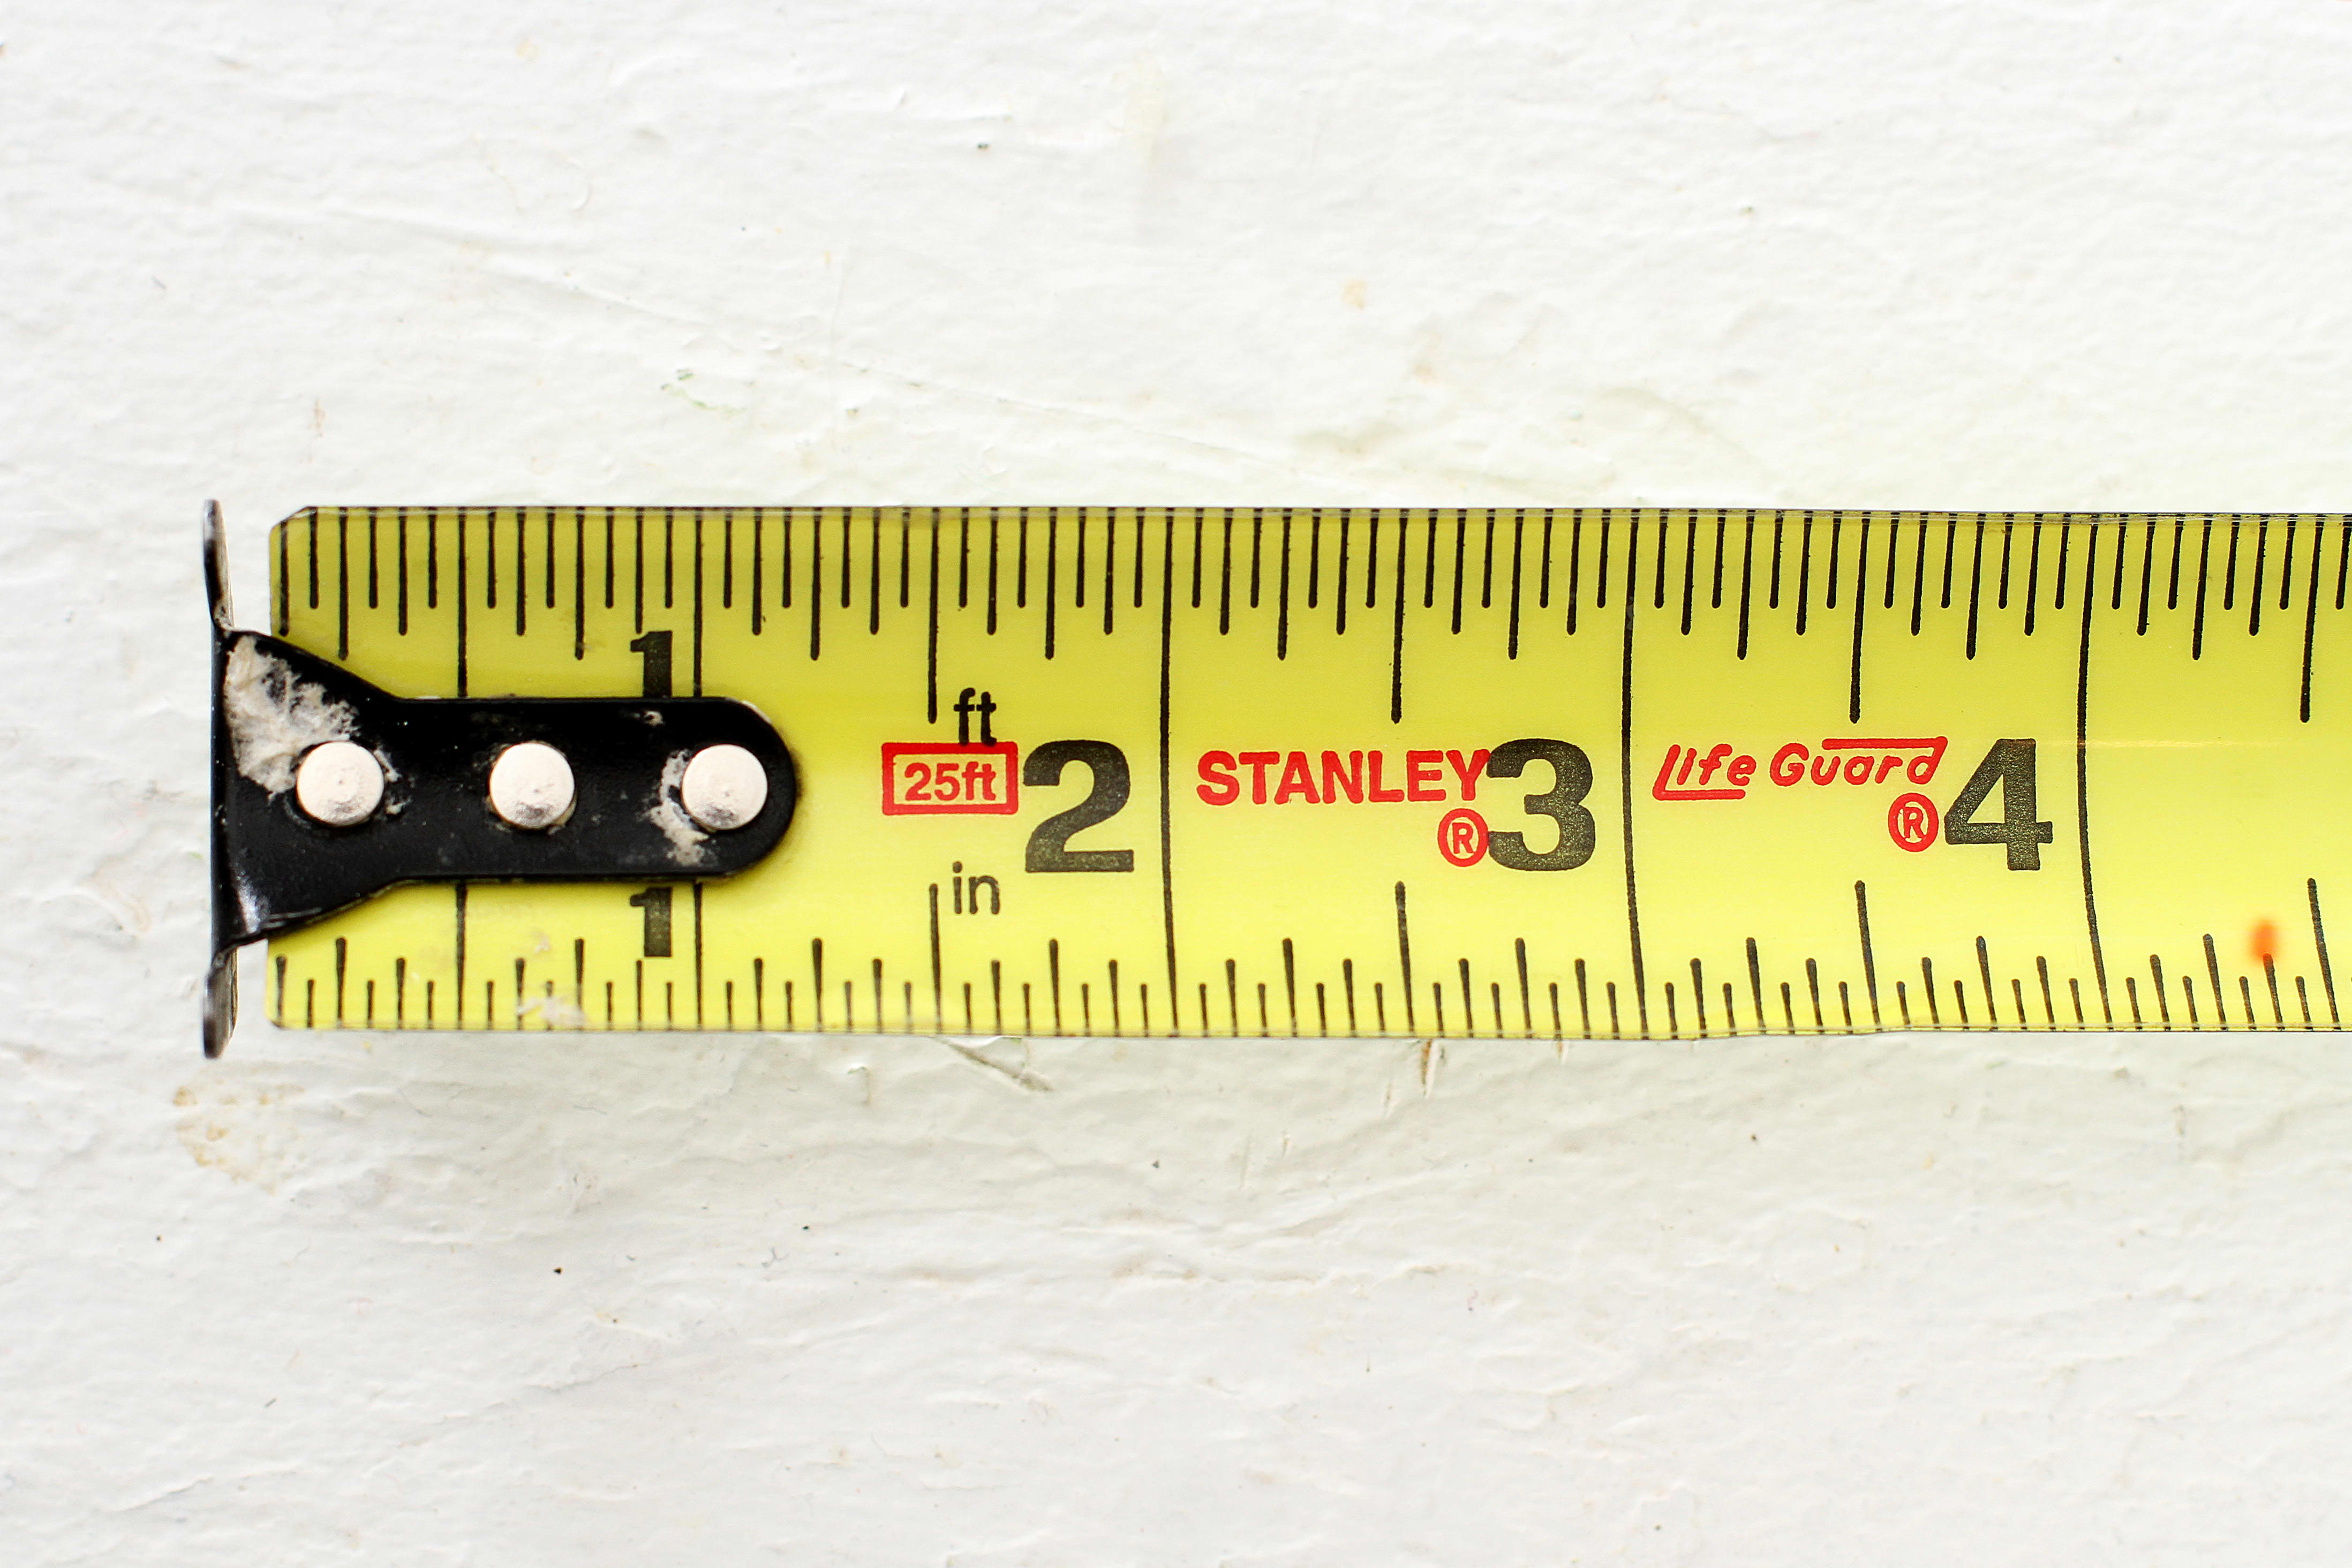 Why You Should Carry Around a Small Tape Measure Like This One